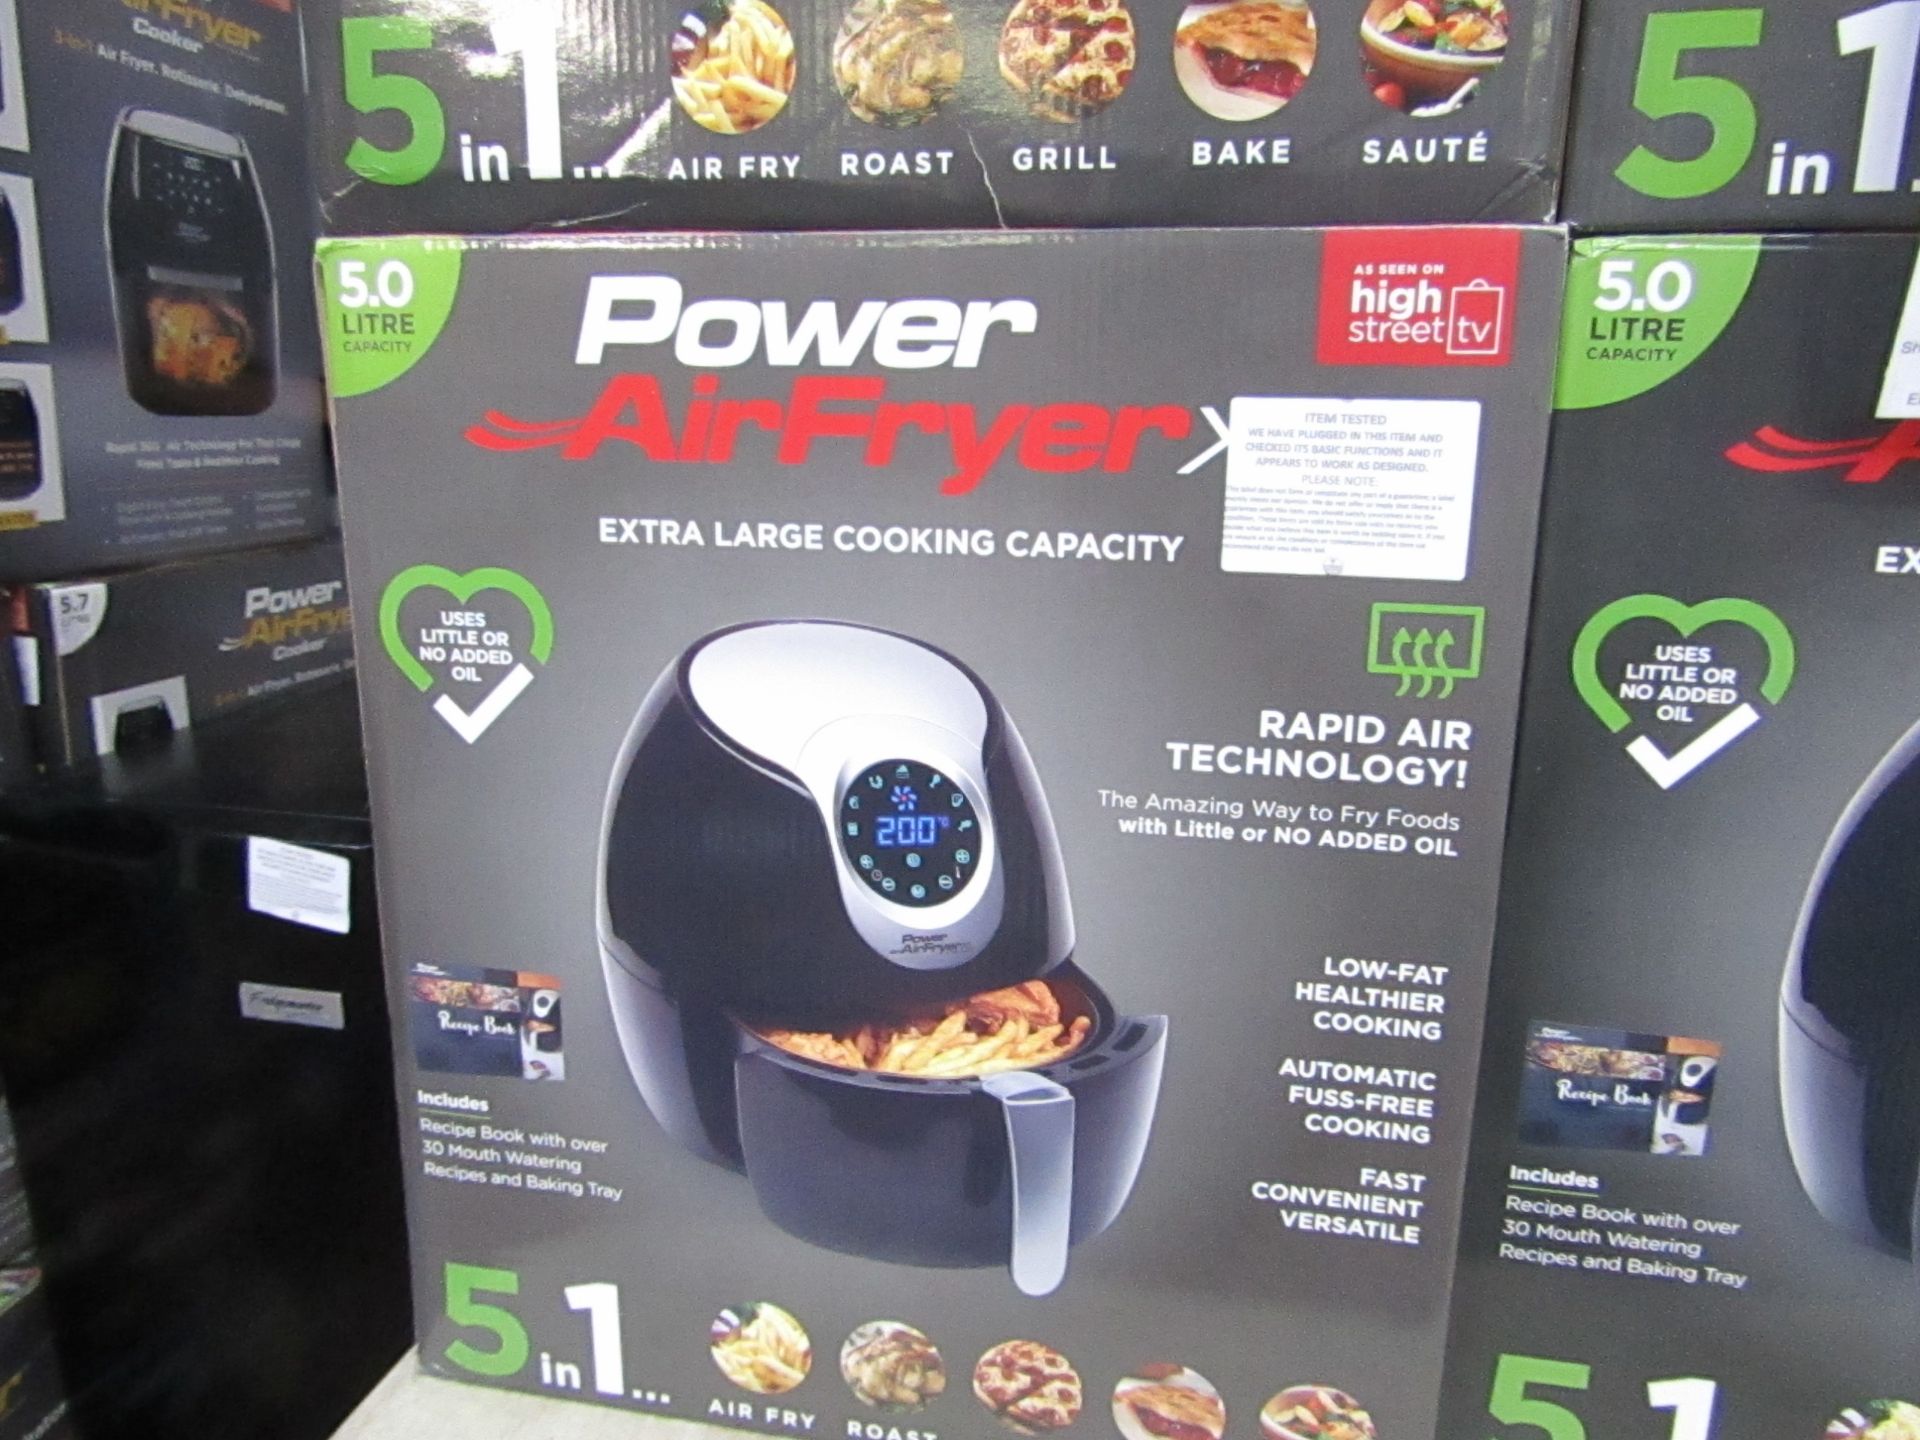 | 1x | power air fryer XL 5 litre black | tested working and boxed - unchecked for accessories |